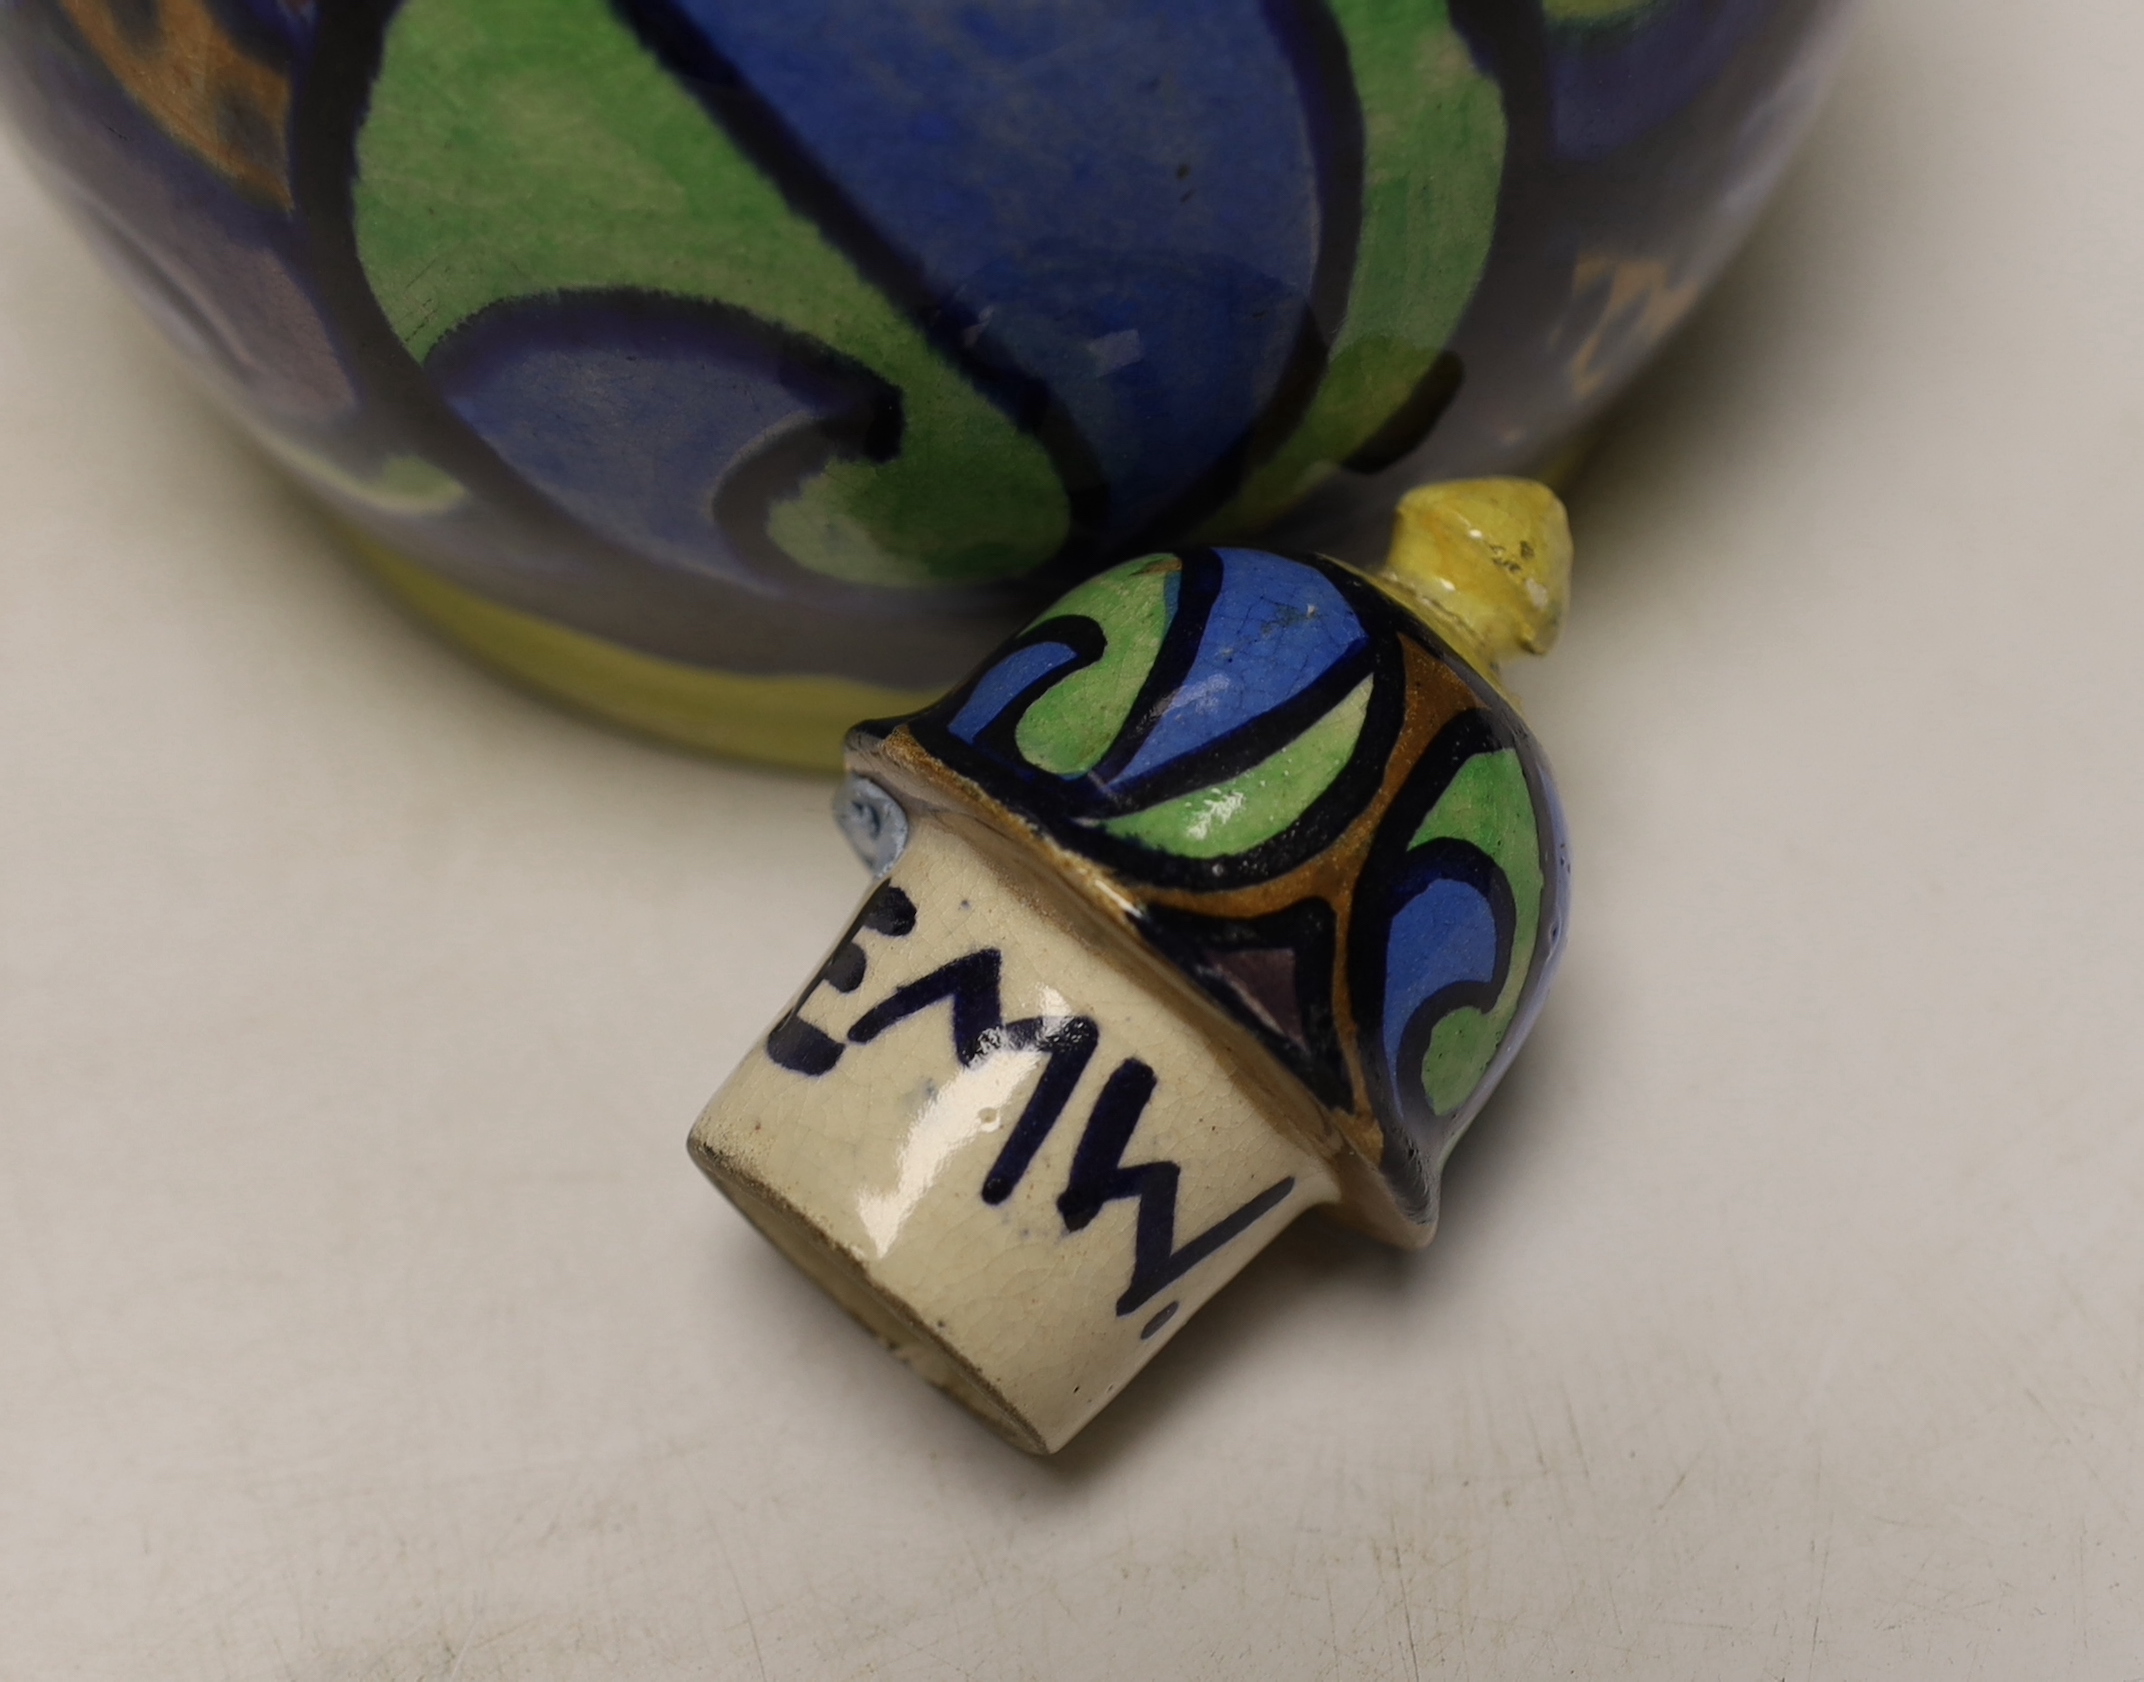 Elizabeth Mary Watt (1886-1954), a pottery bottle vase and cover, initialled EMW and dated 1920, 30cm high